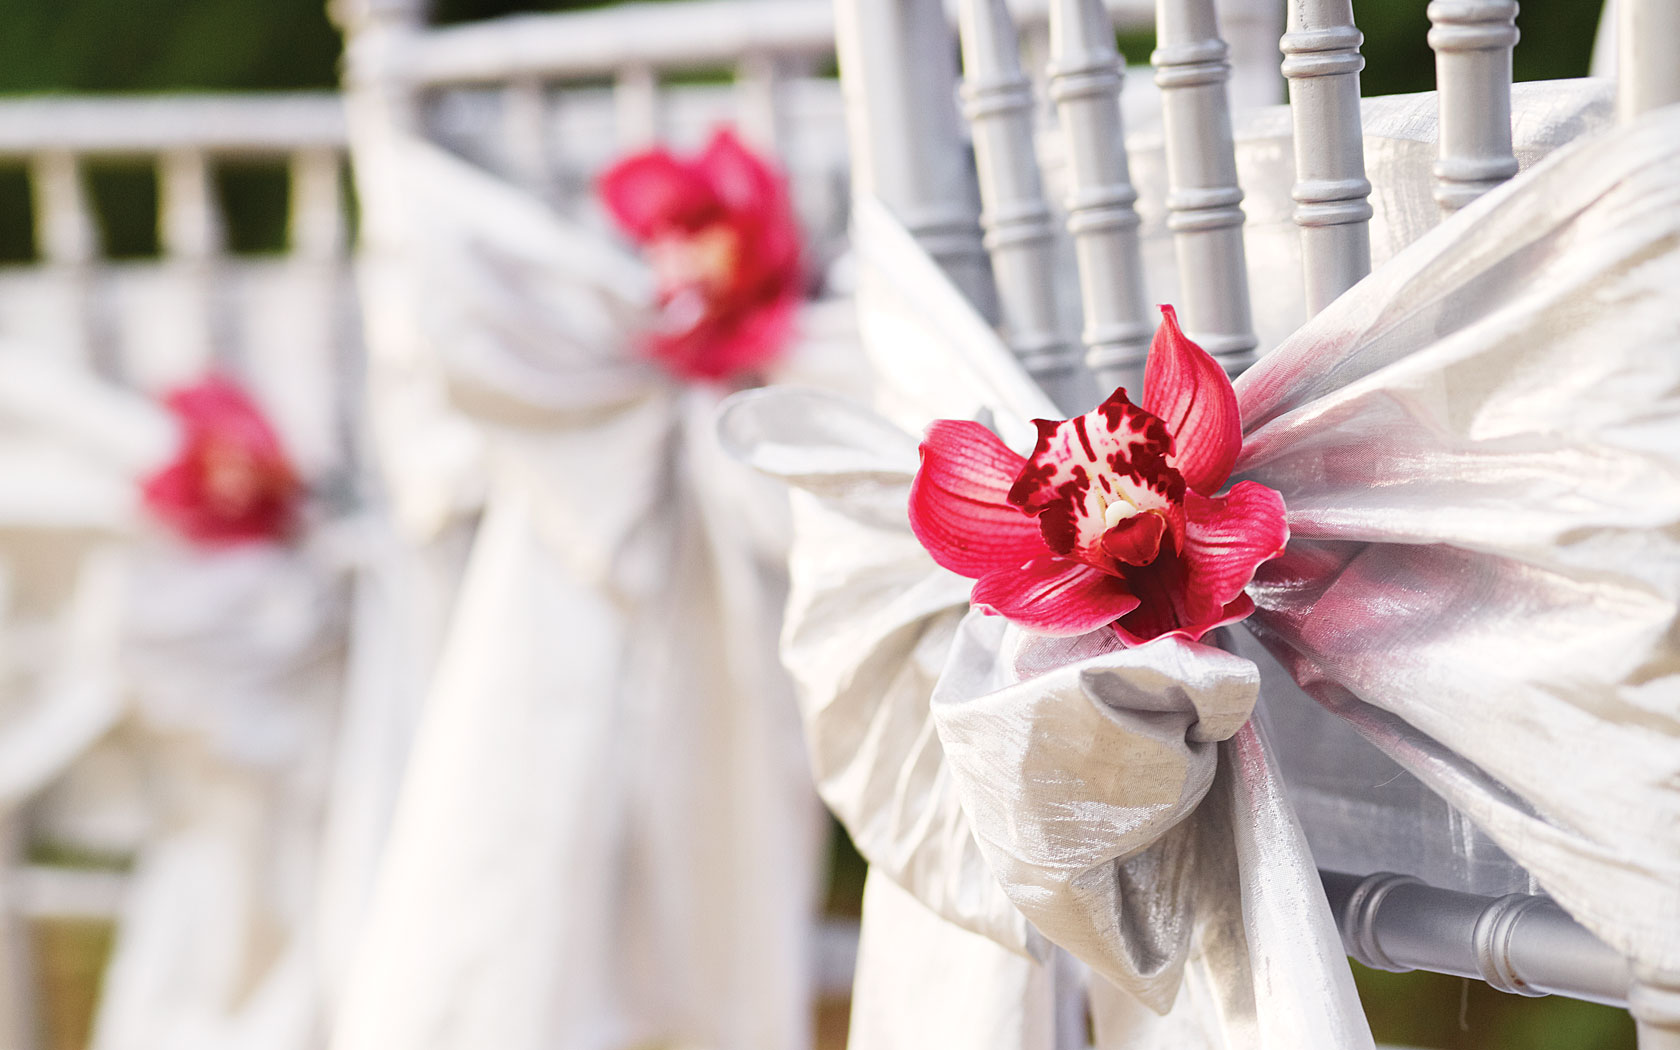 How to choose wedding flowers – our top tips - Couples Resorts